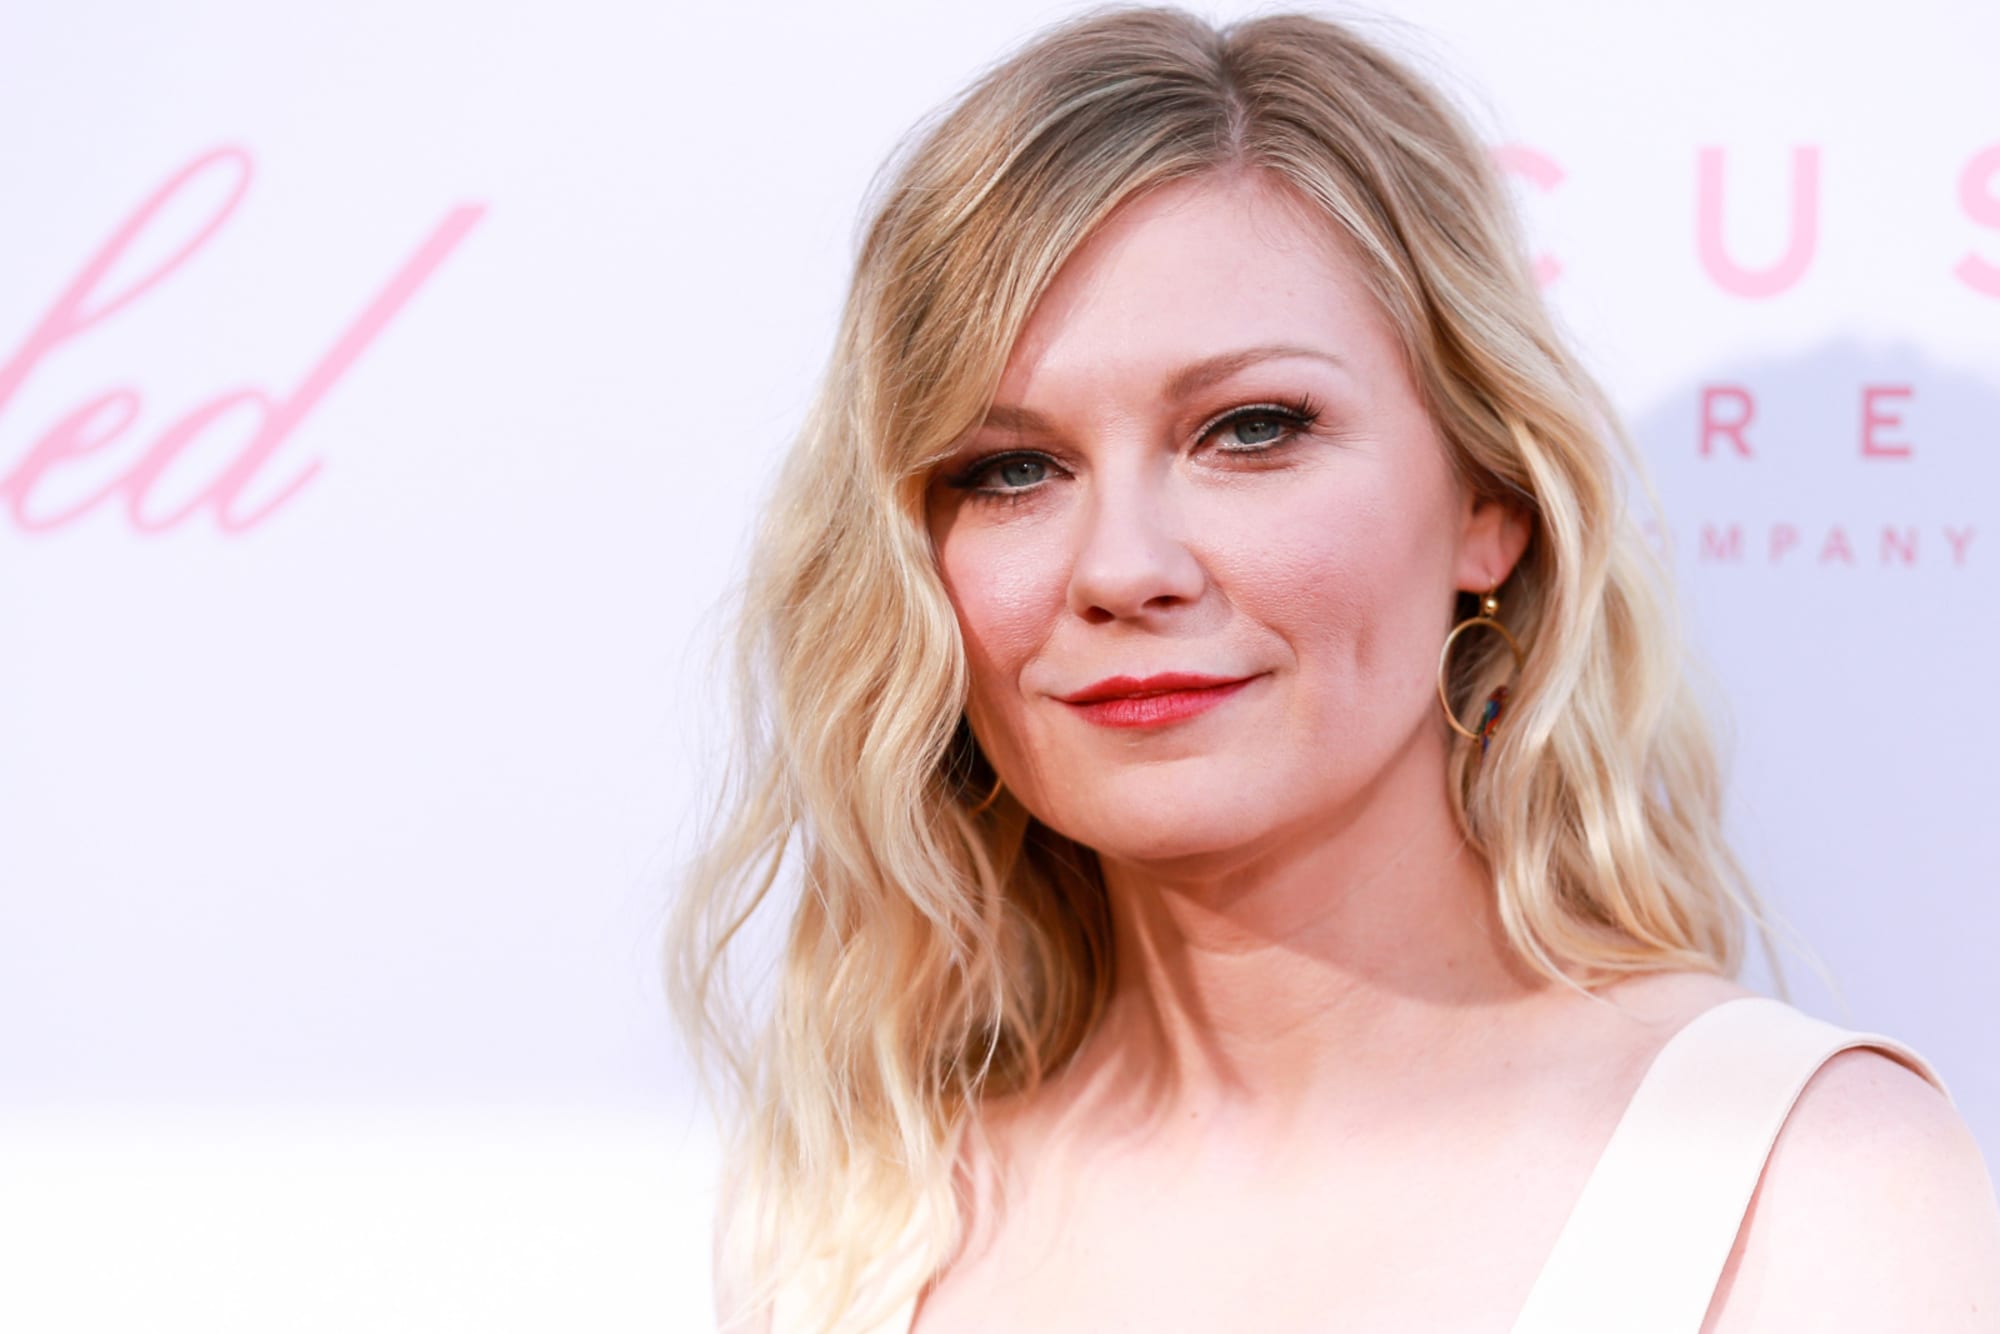 All of the Kirsten Dunst movies on Netflix right now